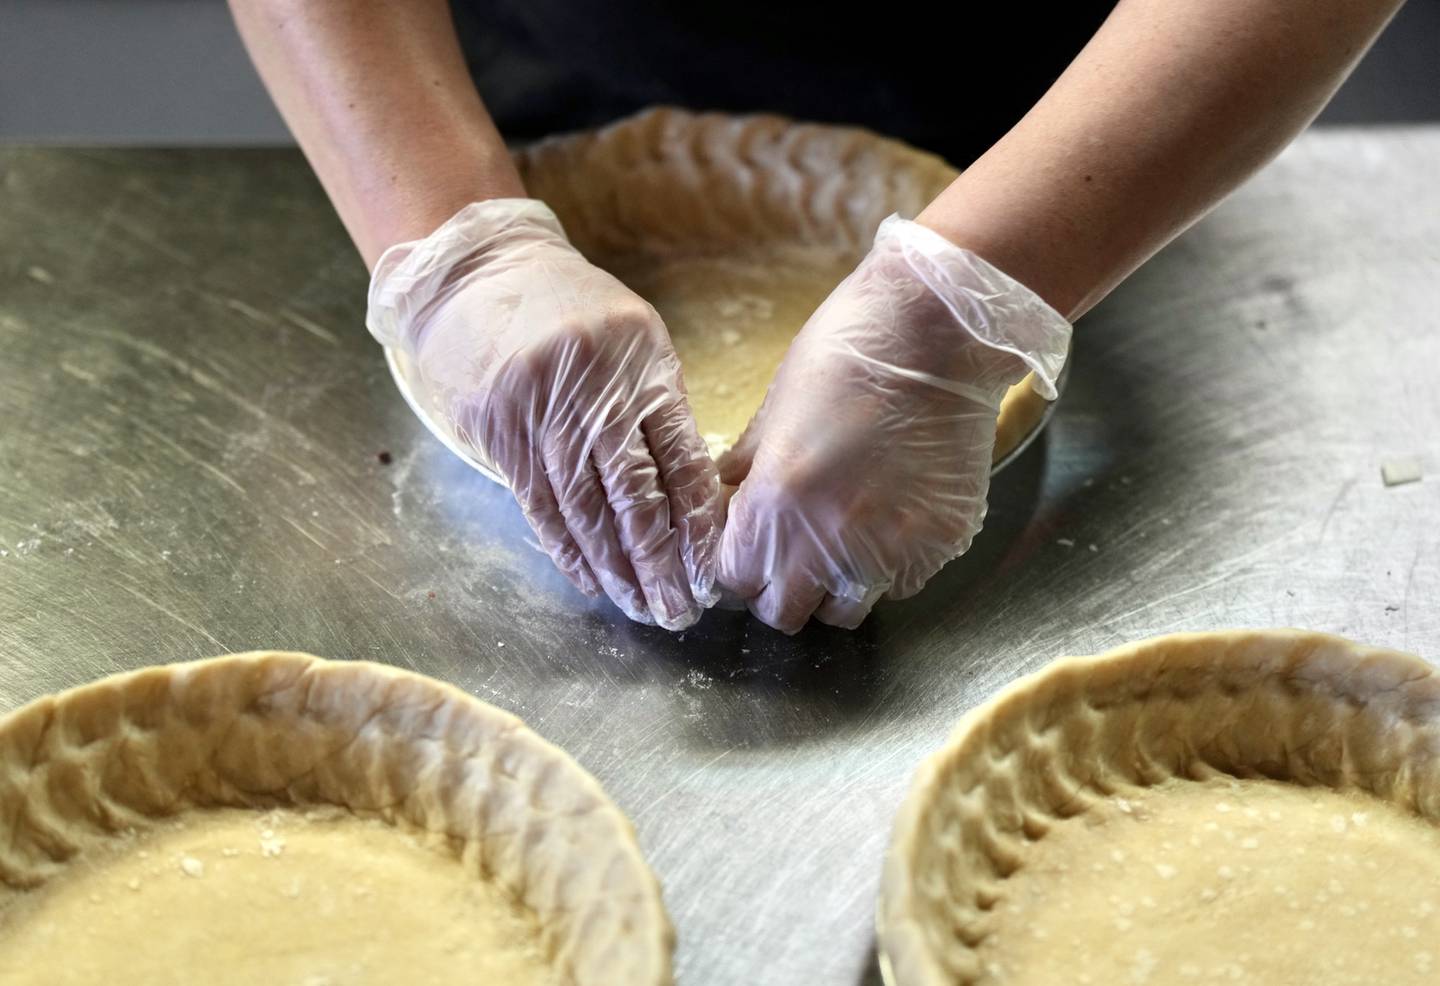 Pie crust gets perfected a the popular pie shop at Dangerously Delicious. (Kaitlin Newman / The Baltimore Banner)